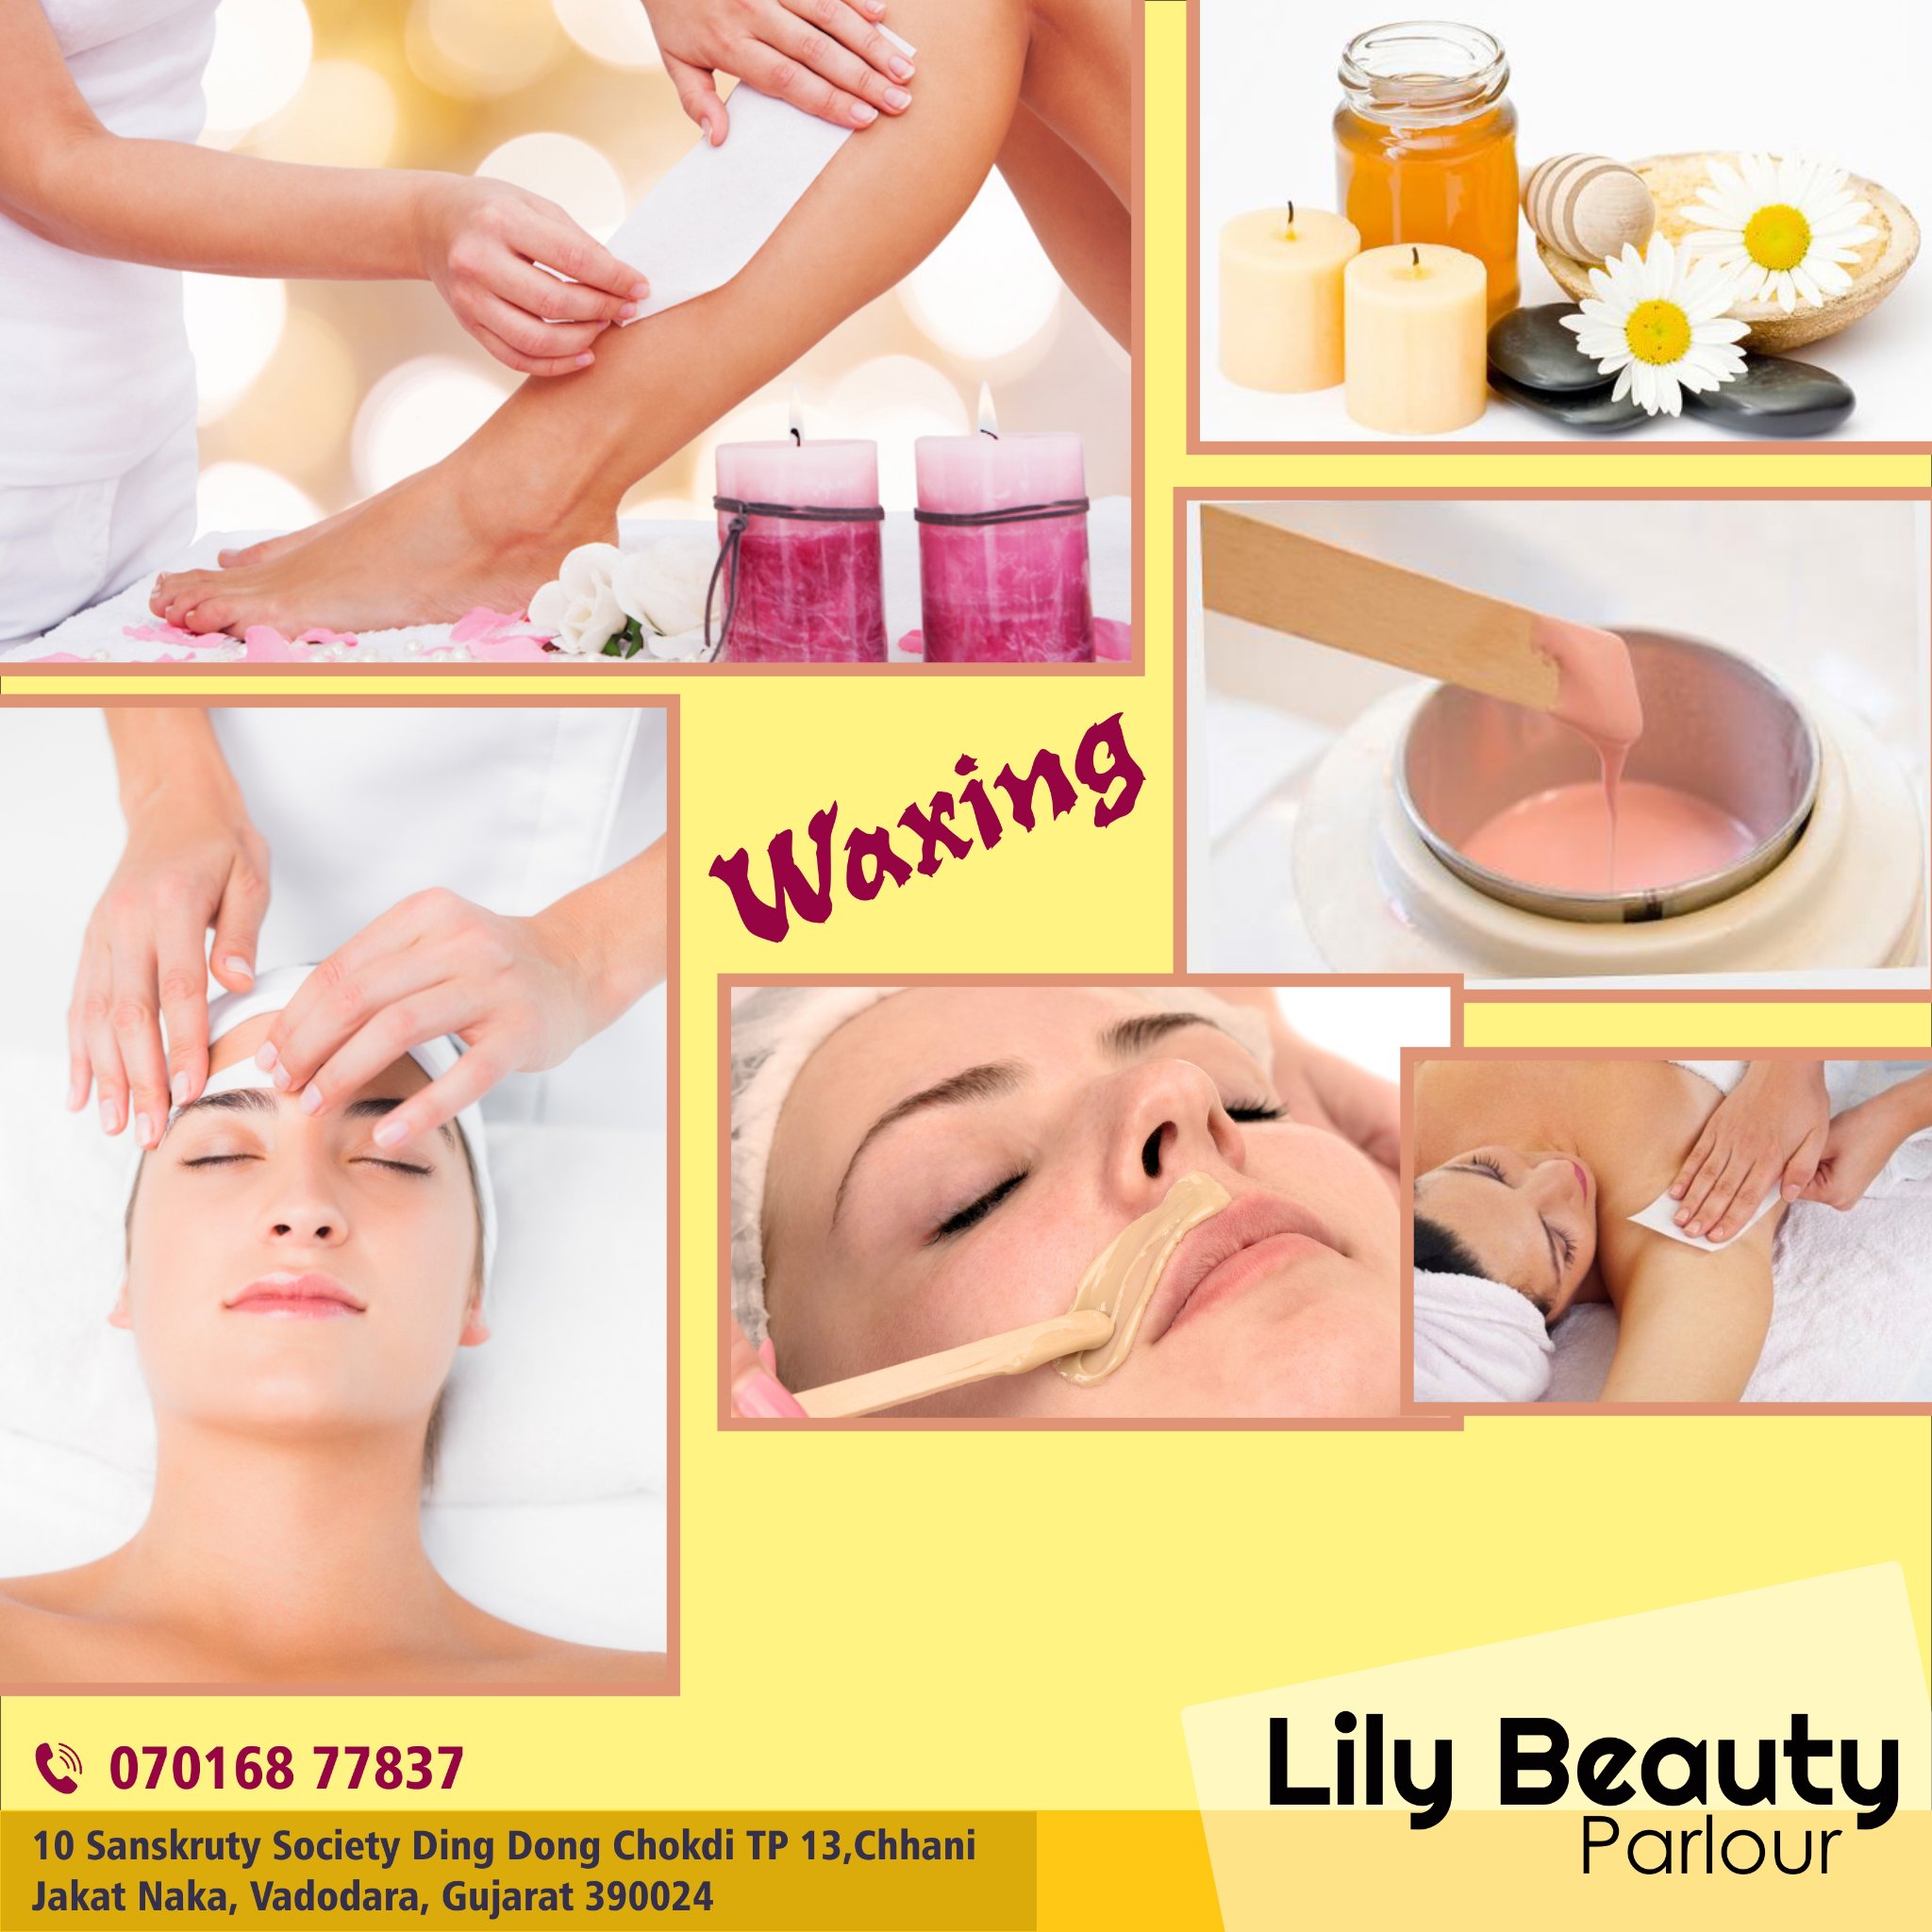 Lily Beauty Parlour (@LParlour) / Twitter